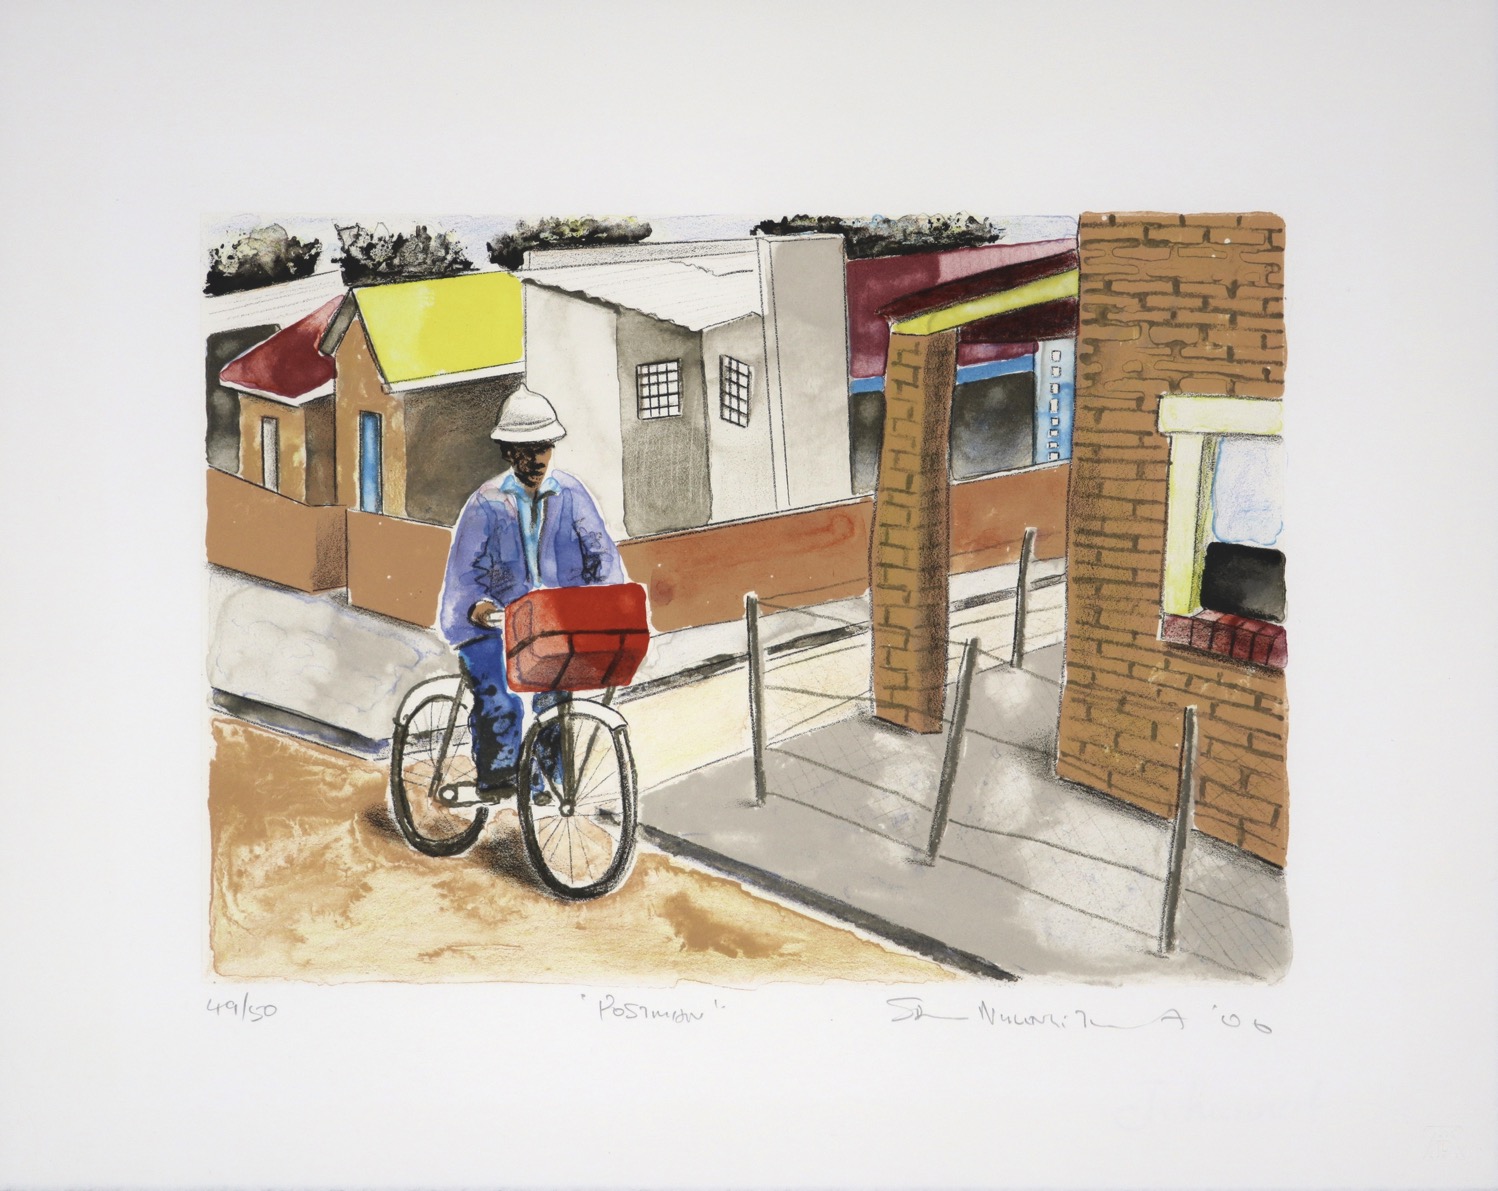 Lithograph of a postman delivering post on his bicycle in a South African township